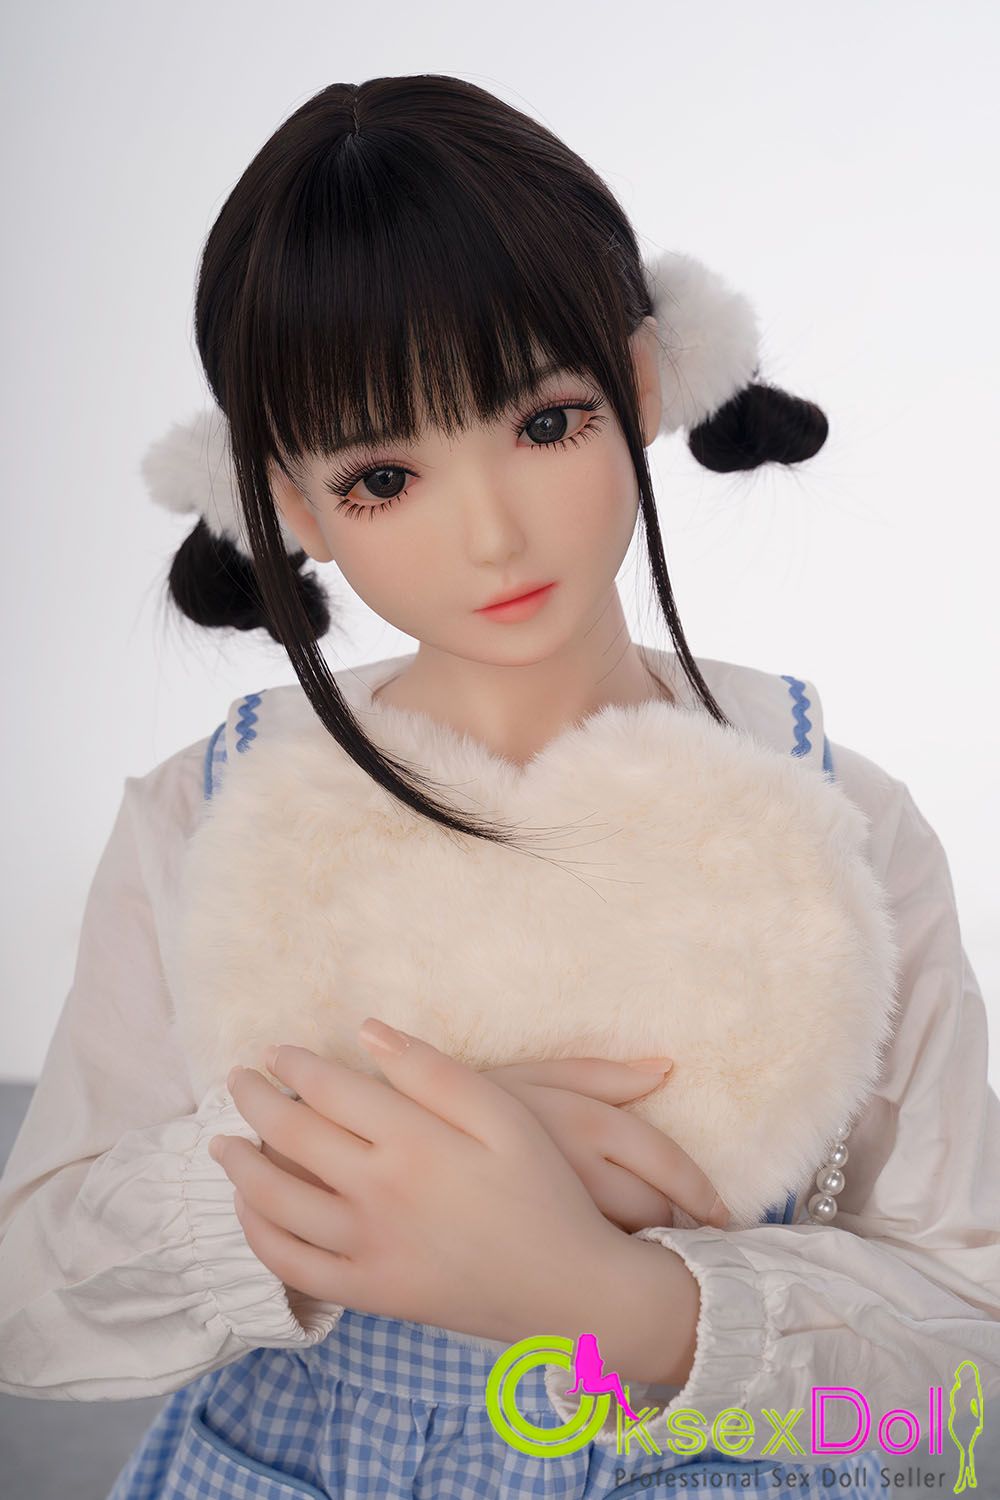 sex doll pics of Koto AXB 140cm B-cup Asina Teen Sex Doll Pictures